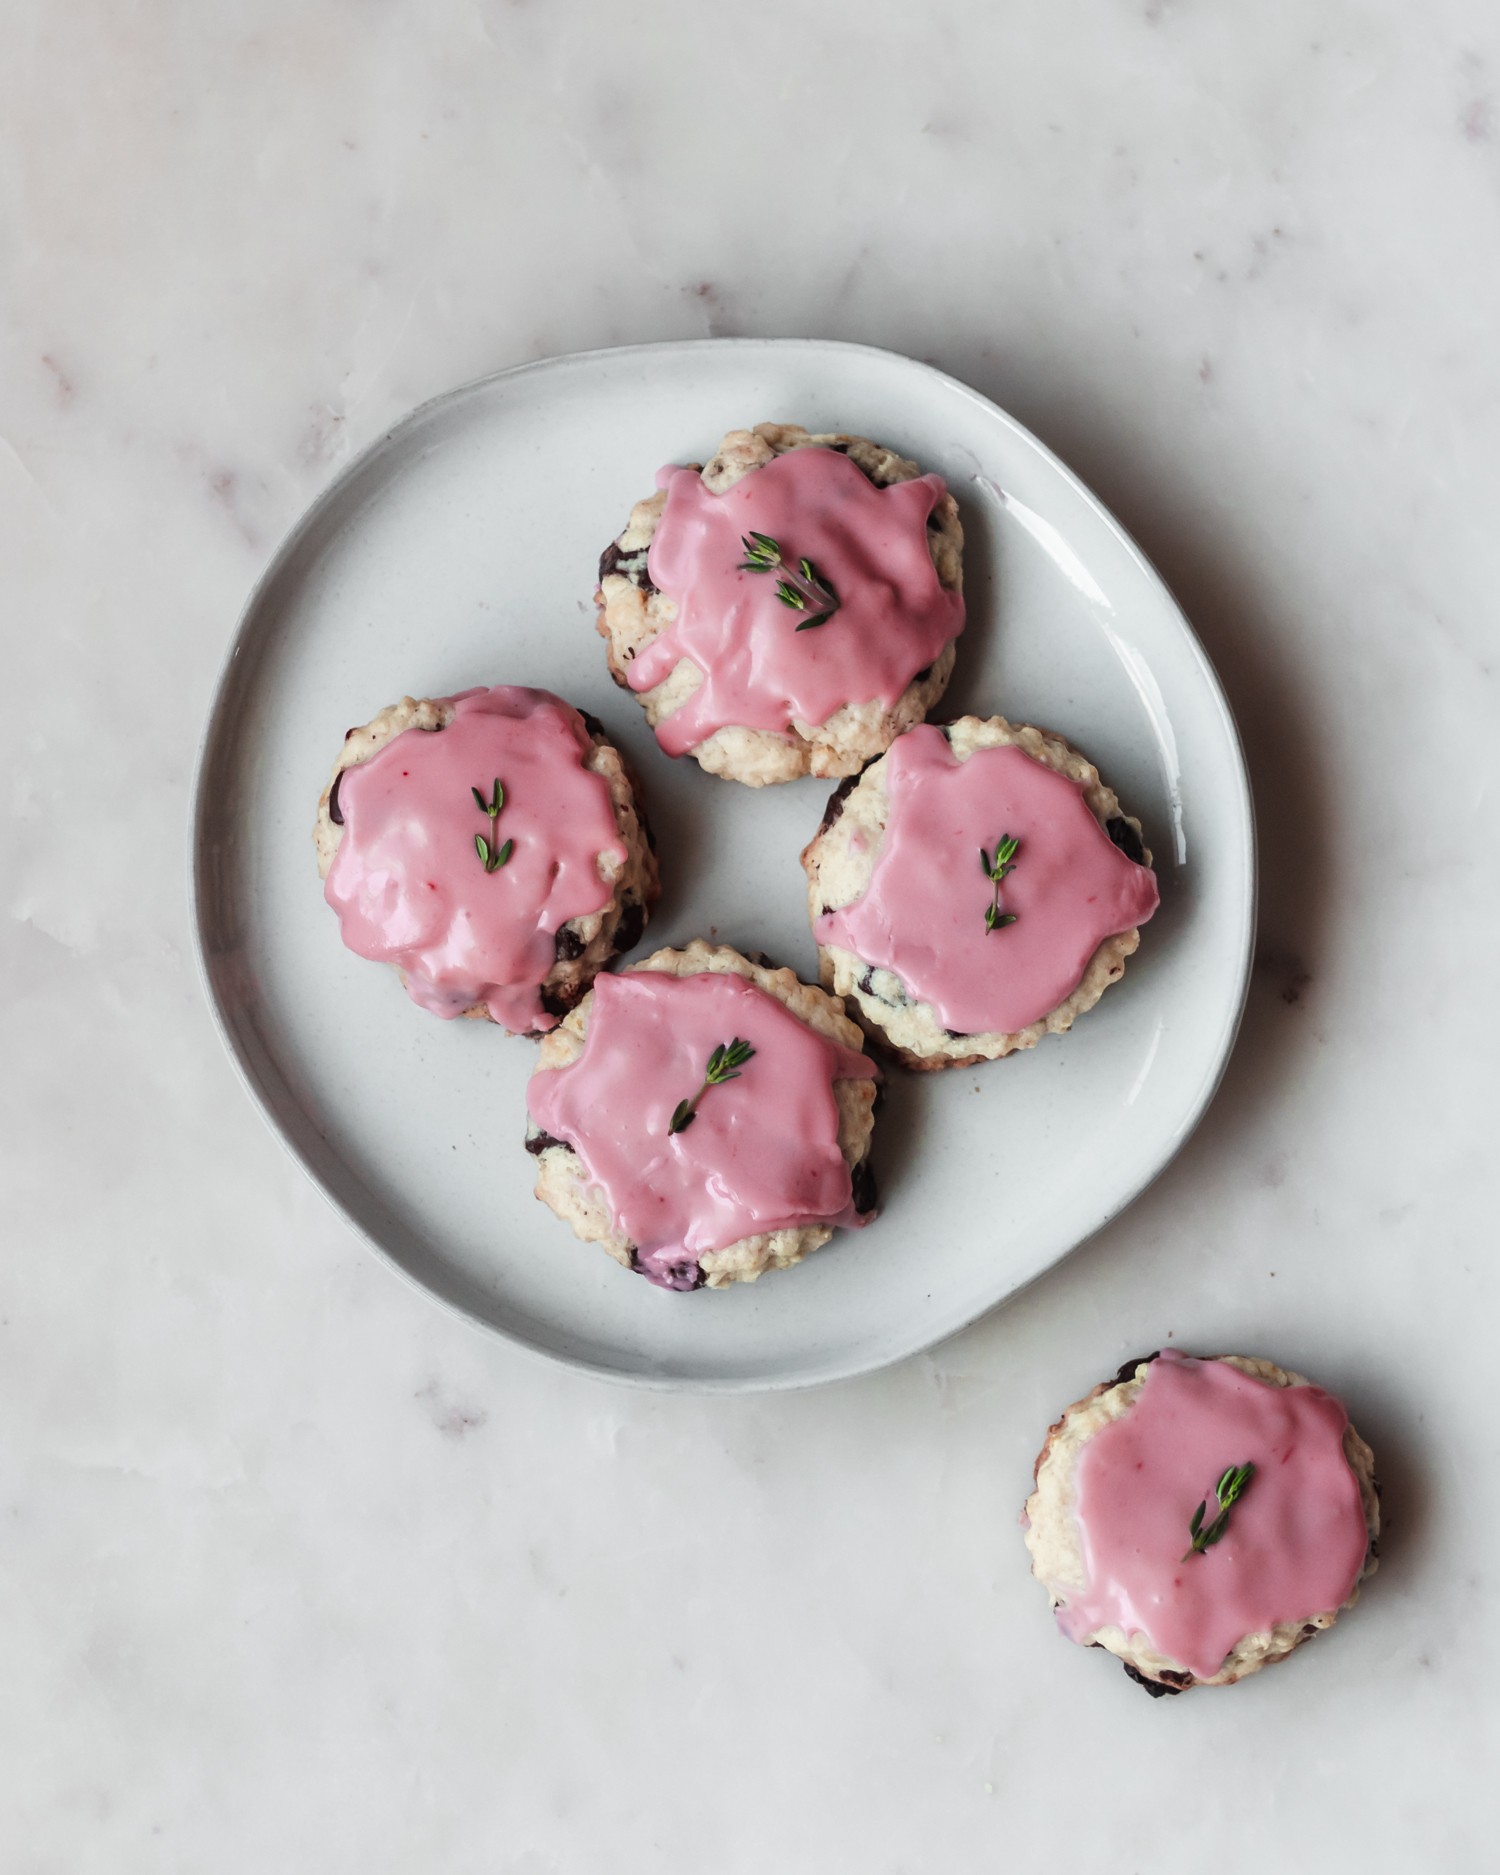 Four chocolate chip scones with pink glaze on a white plate sitting on a marble background.